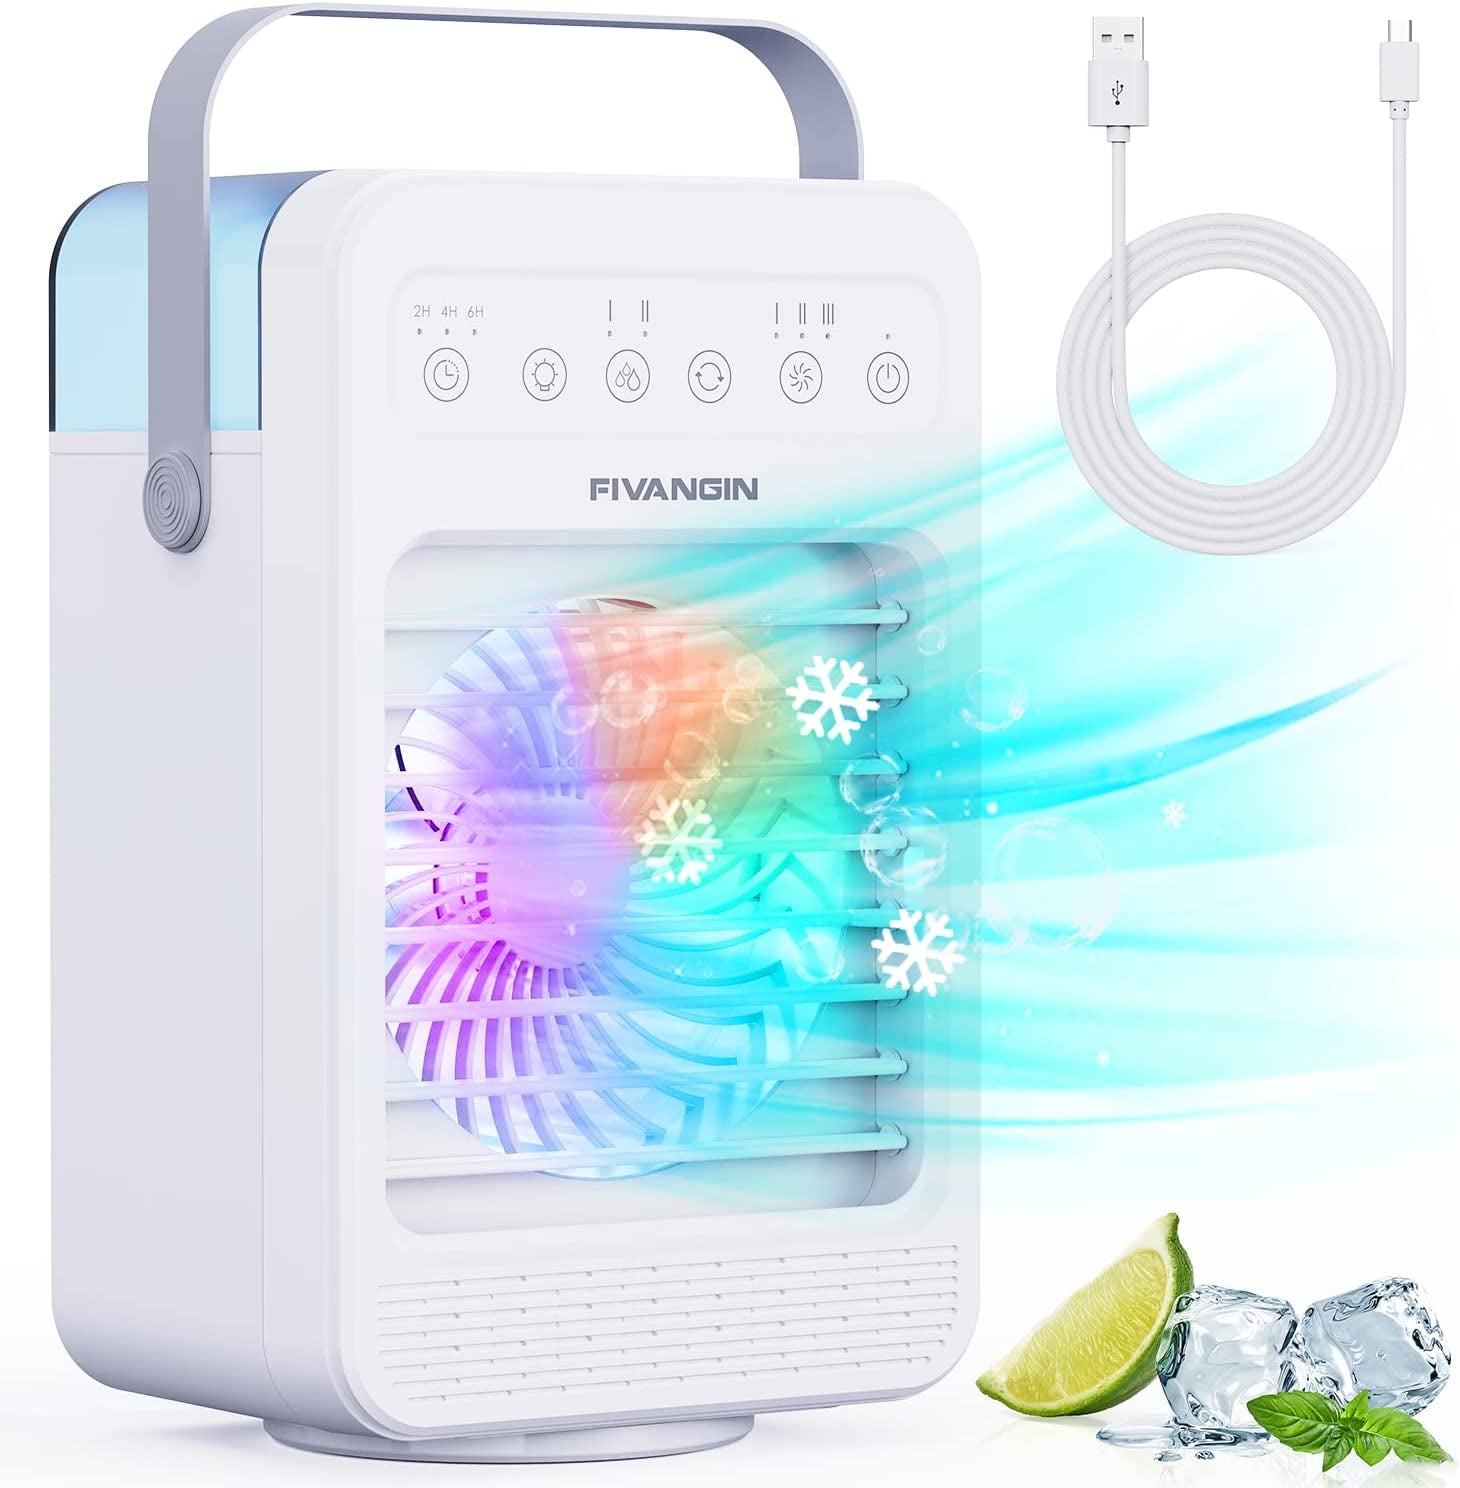 Air Cooler, Personal Portable Air Conditioner with Colored Lights, 4 Speeds, Automatic Oscillation, 4 in 1 Mini Air Cooler Ideal for Home/Bedroom/Dorm/Office